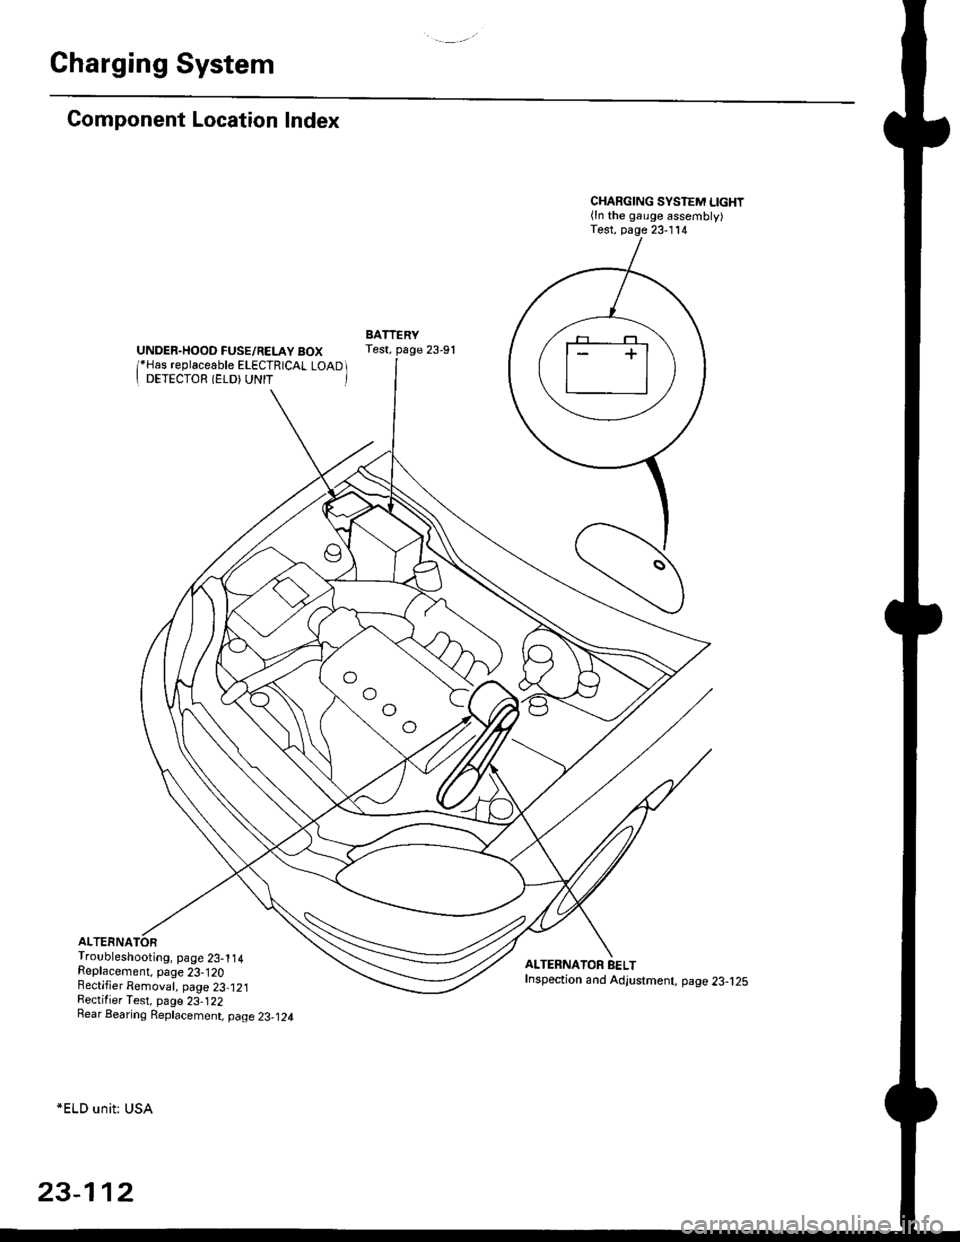 HONDA CIVIC 1998 6.G Workshop Manual Charging System
Component Location Index
UNDER.HOOD FUSE/RELAY BOX/*Has replaceable ELECTRICAL LOAD II DETECTOR (ELD) UNIT 
Troubleshooting, page 23-1 14Replacement, page 23-120Bectifier Removal, pag